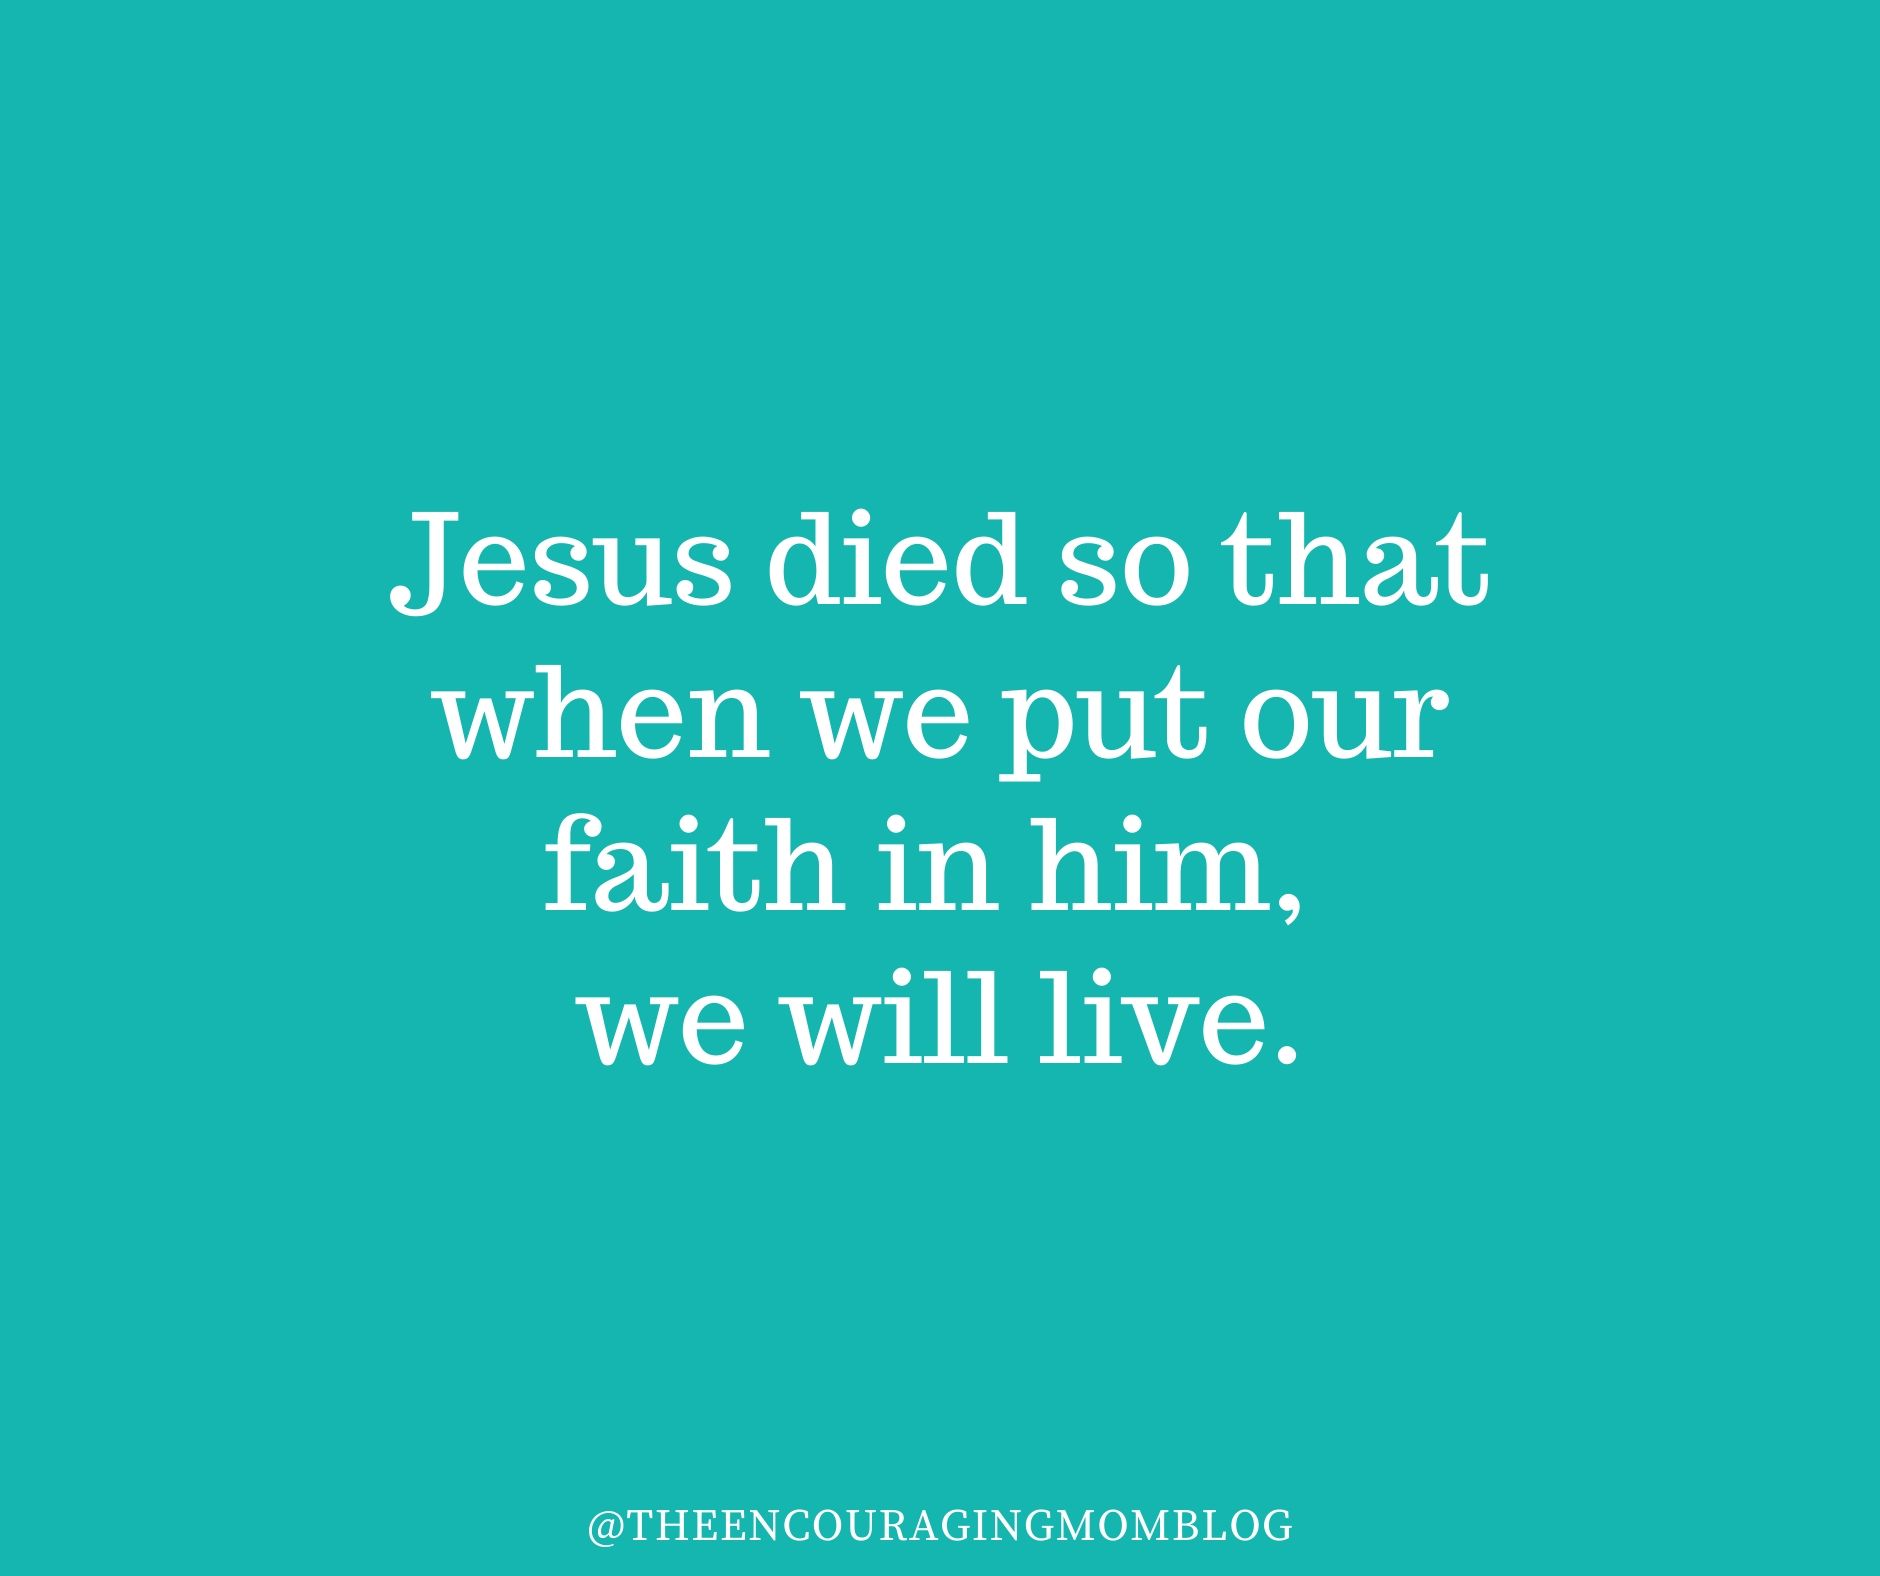 Jesus died so that when we put our faith in him, we might live. – The ...